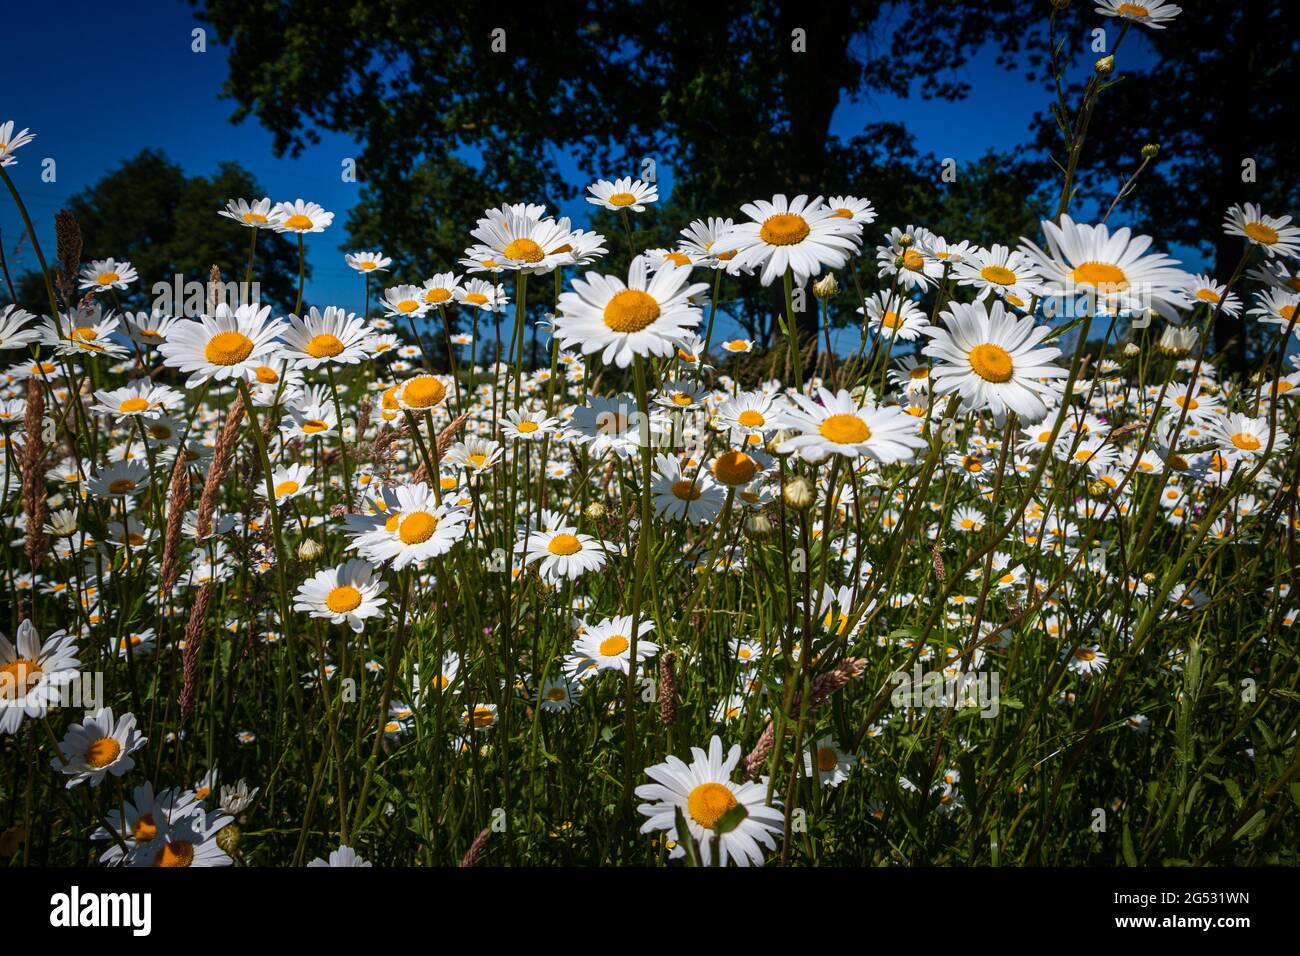 Beautiful beautiful white daisies in the field, close to the licorice Zuidwolde, province of Drenthe, the Netherlands Stock Photo